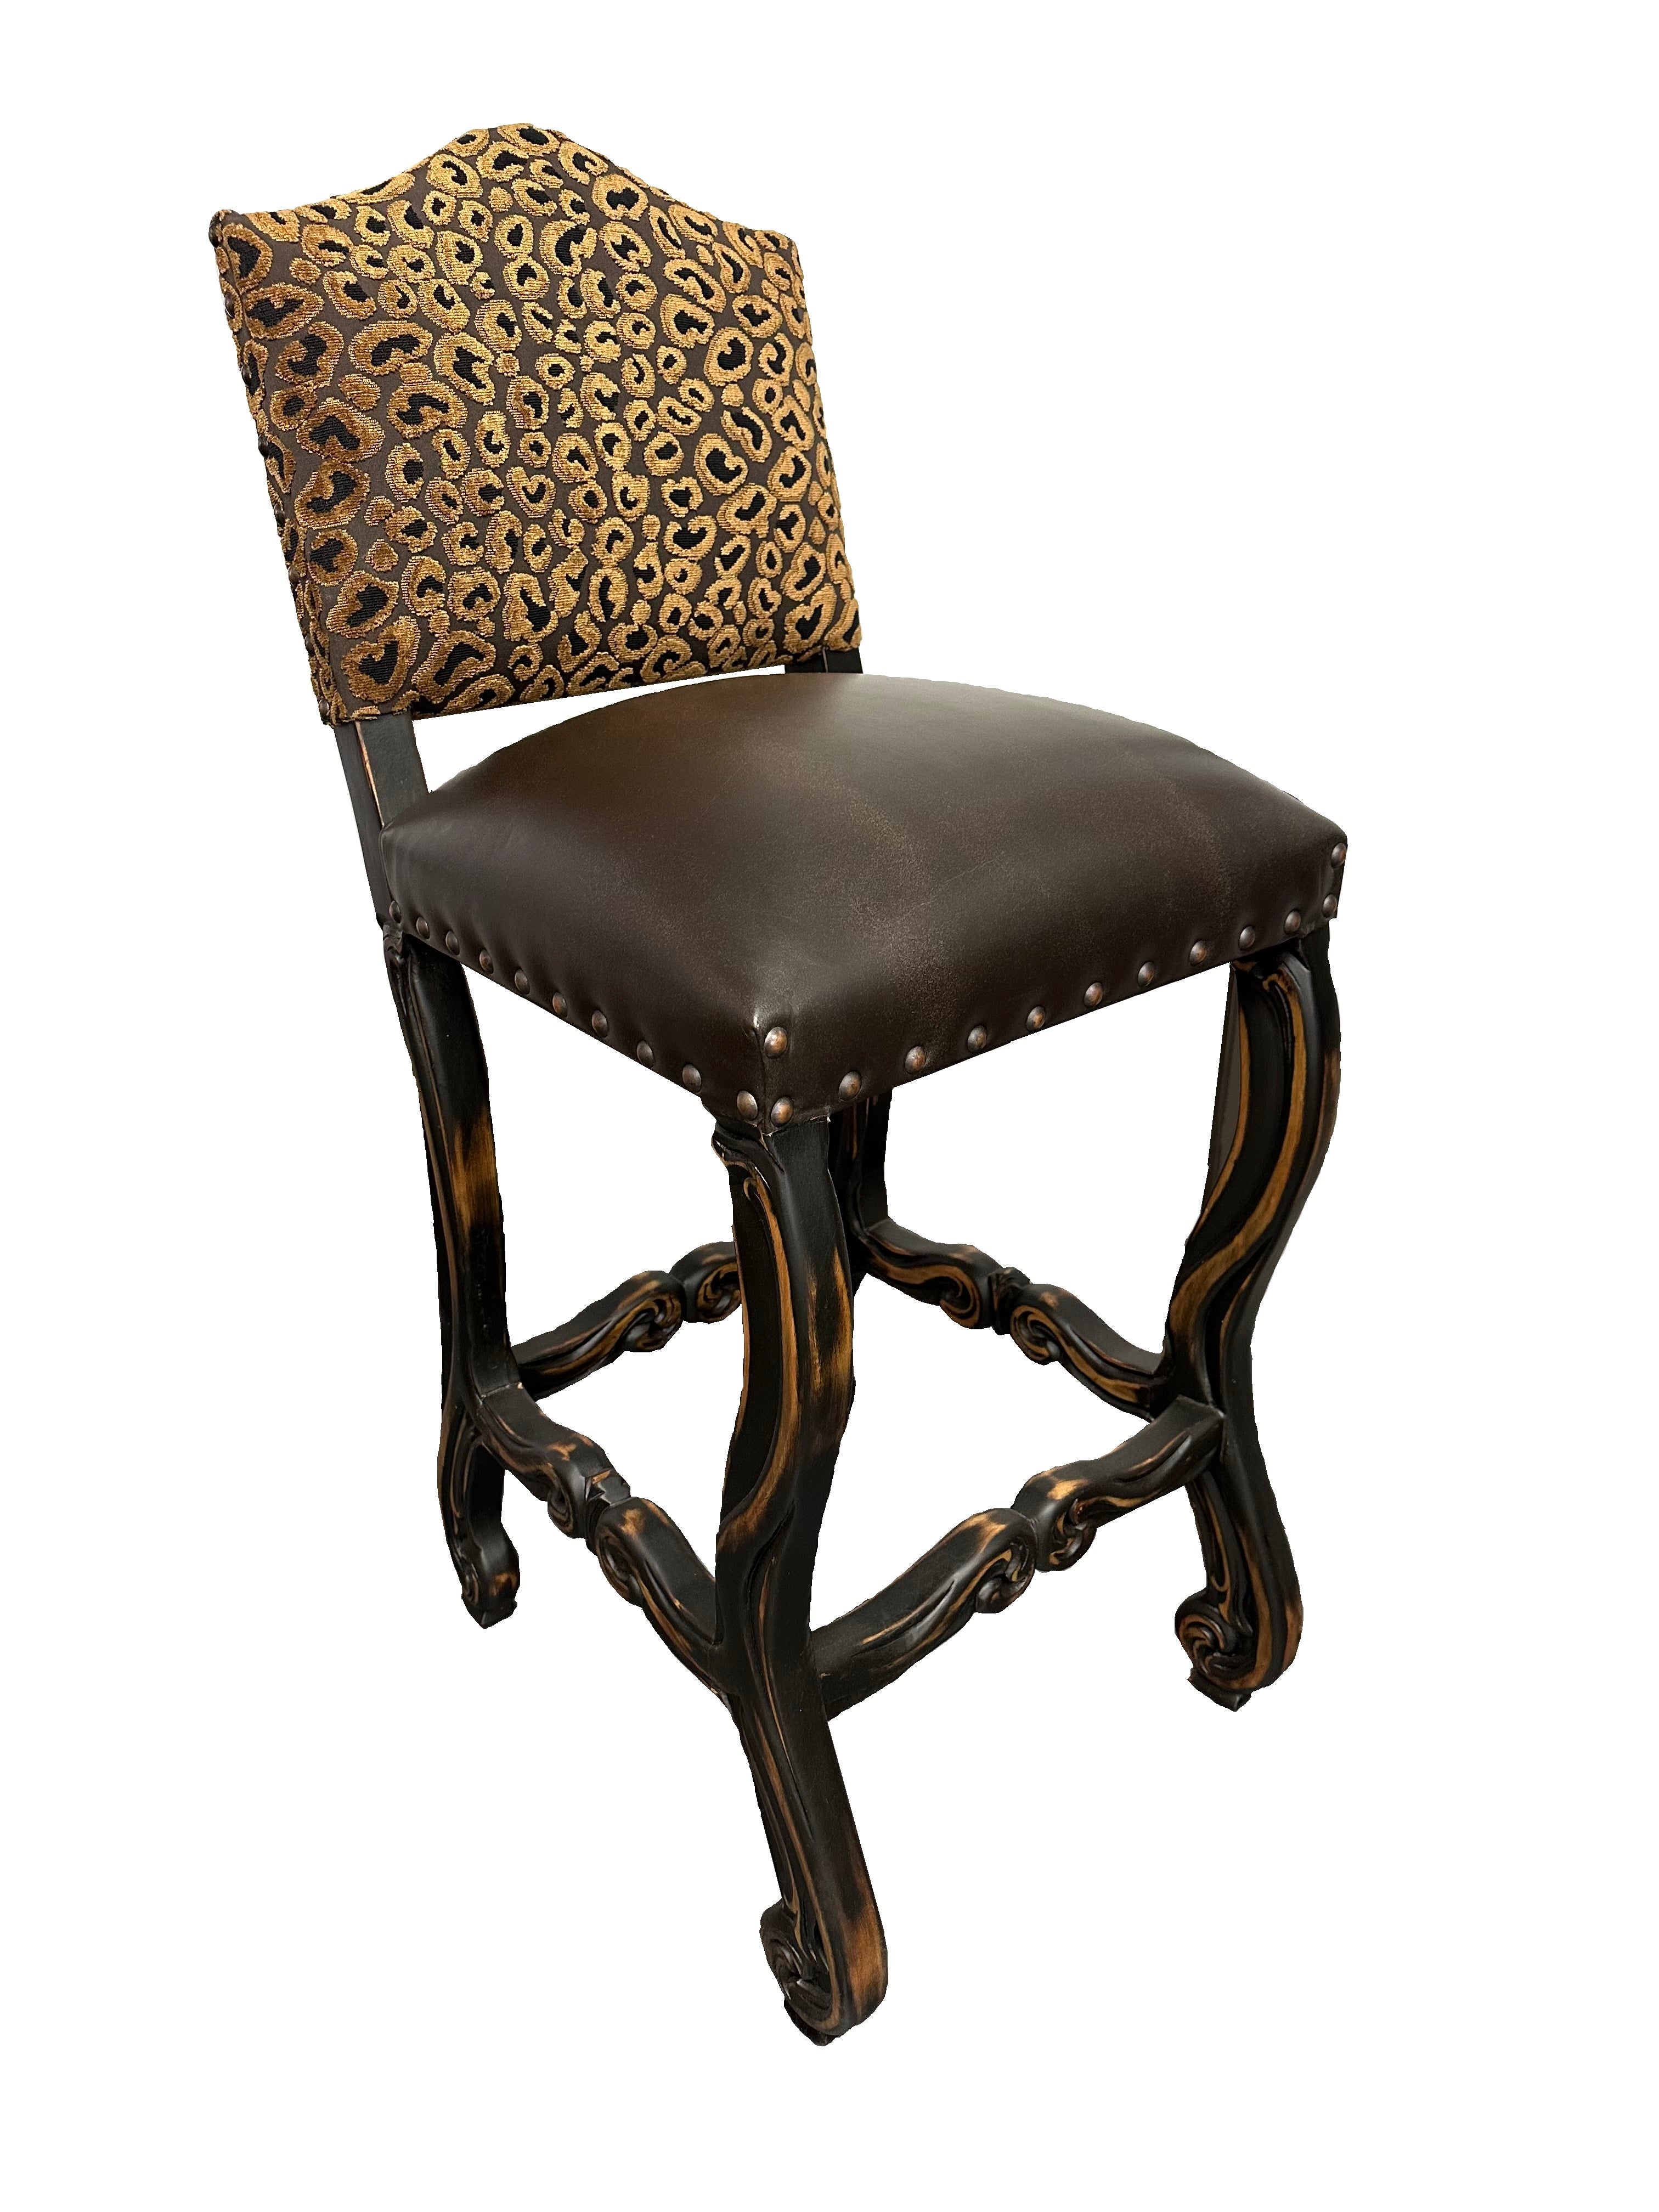 Old World Upholstered Bar Stools Leopard Chenille Print with Carved Back